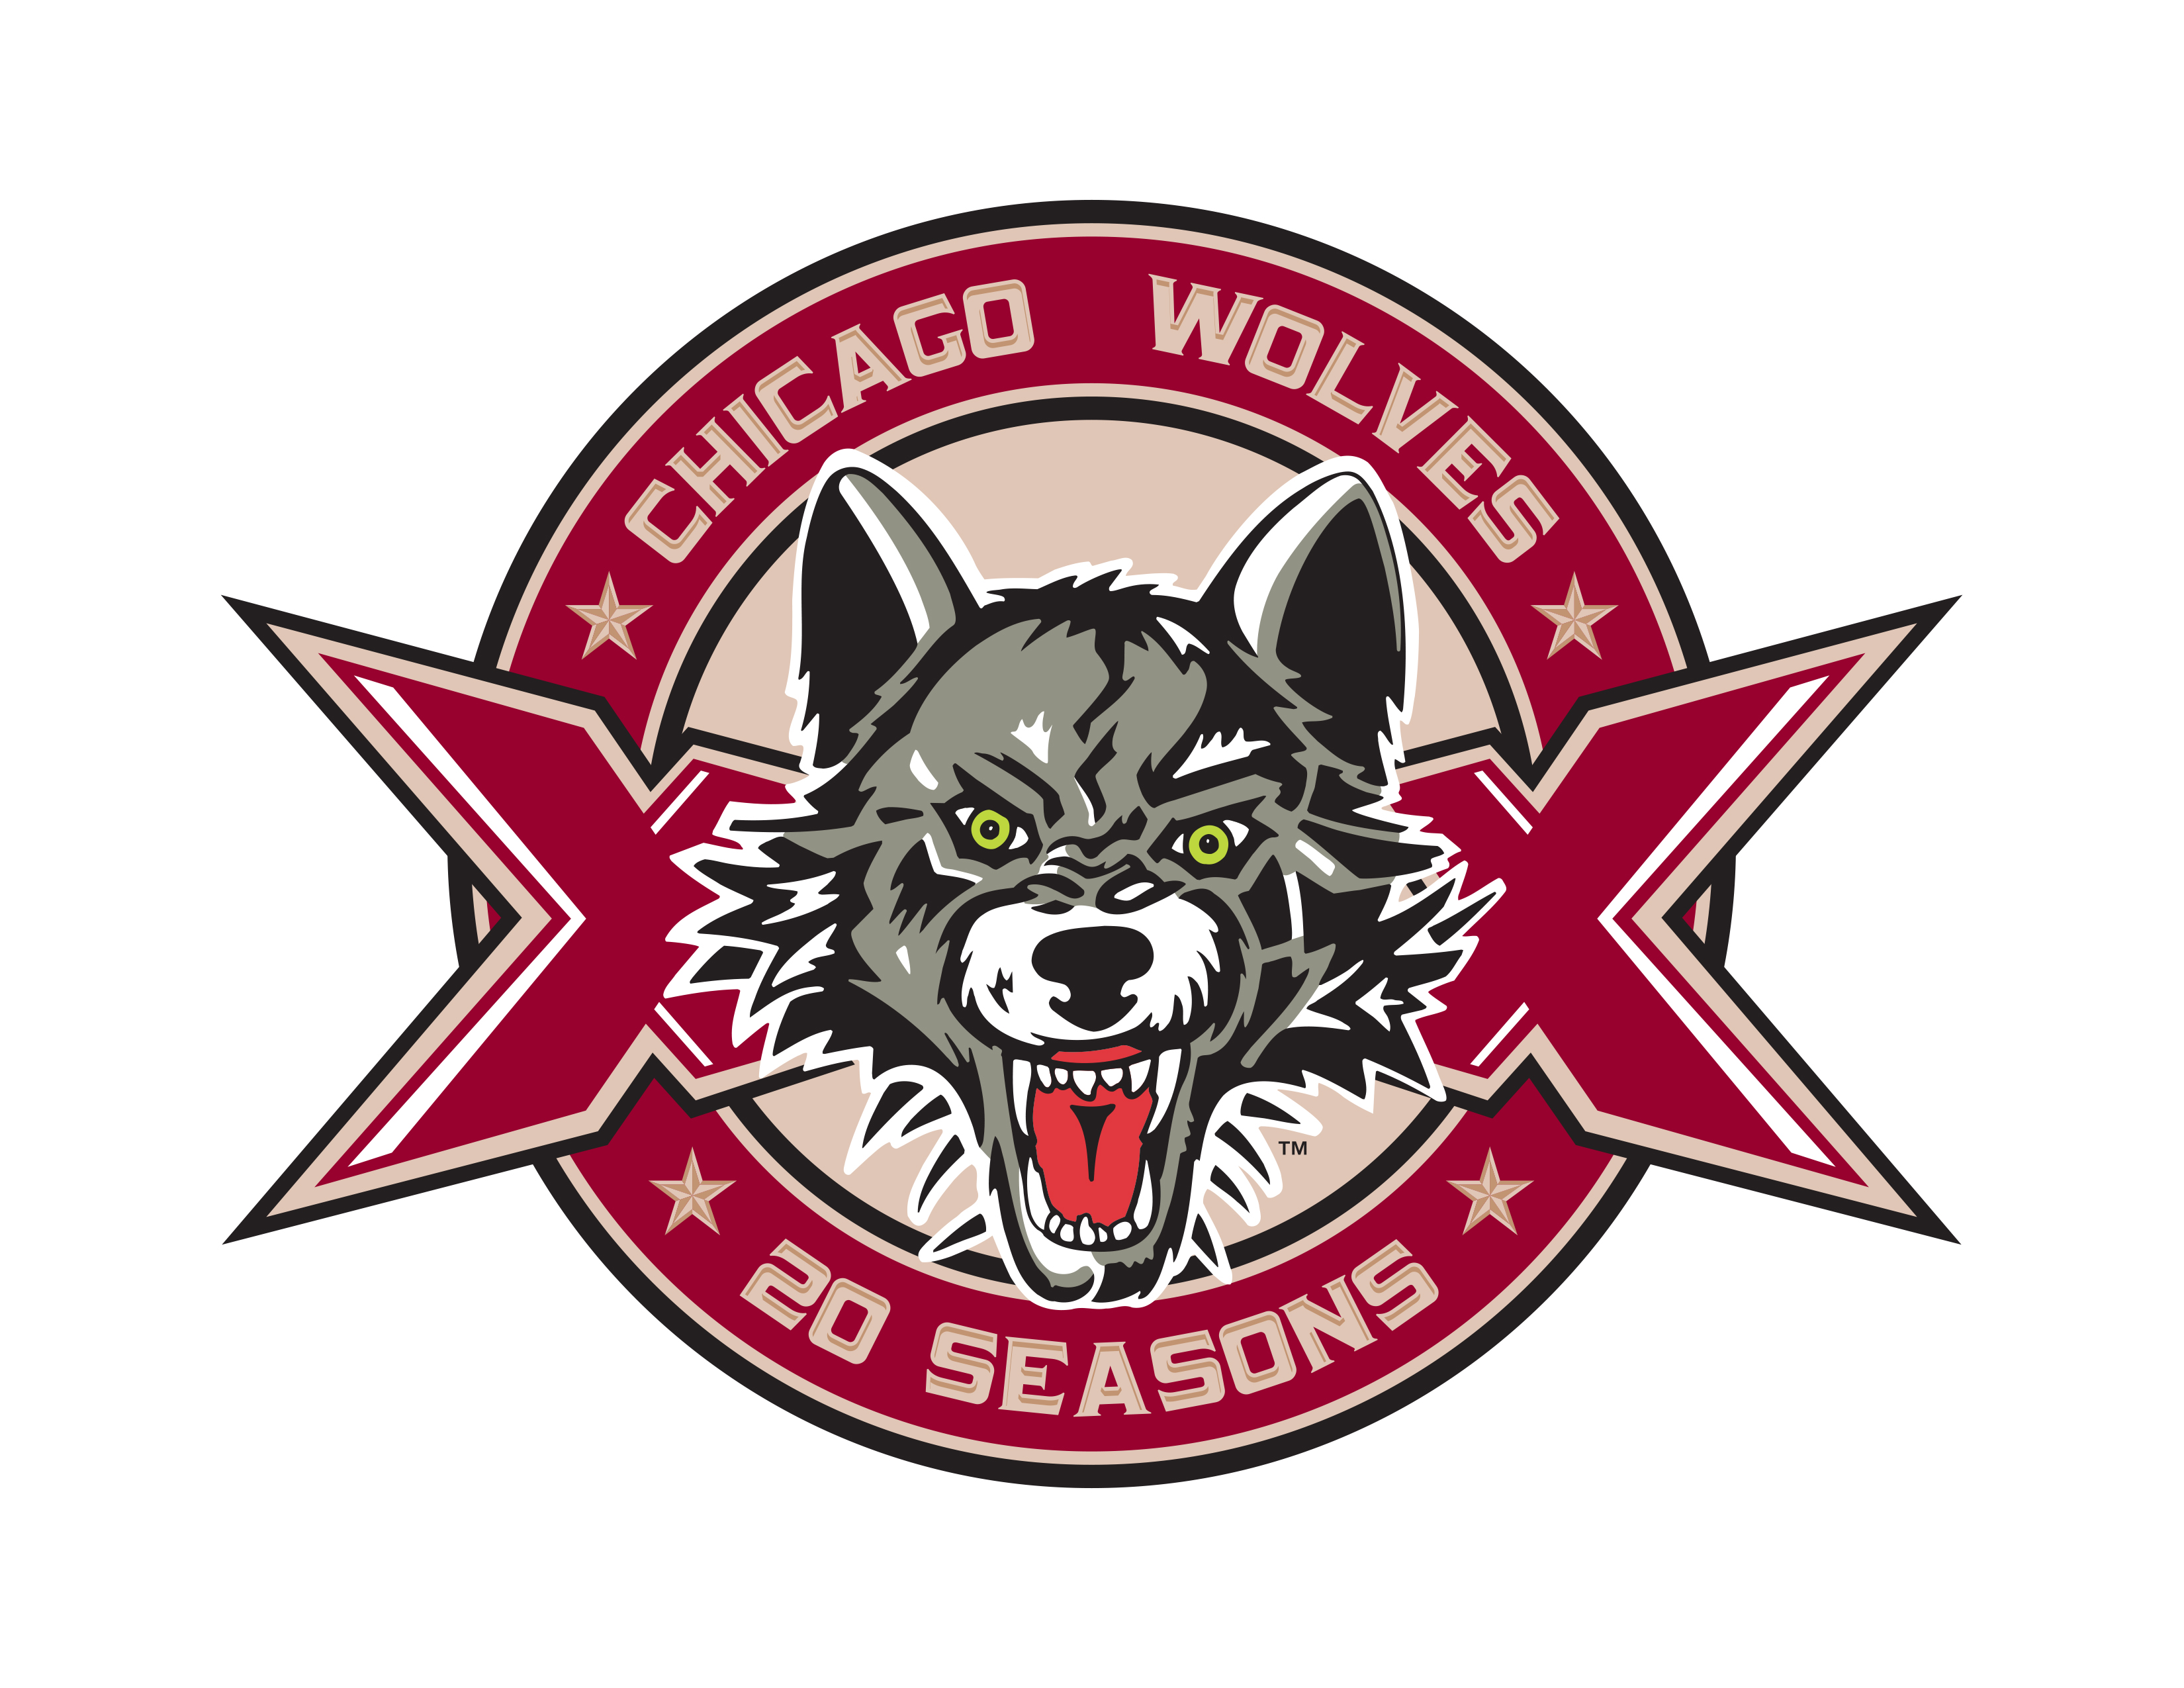 St Louis Blues affiliate Chicago Wolves have new logo